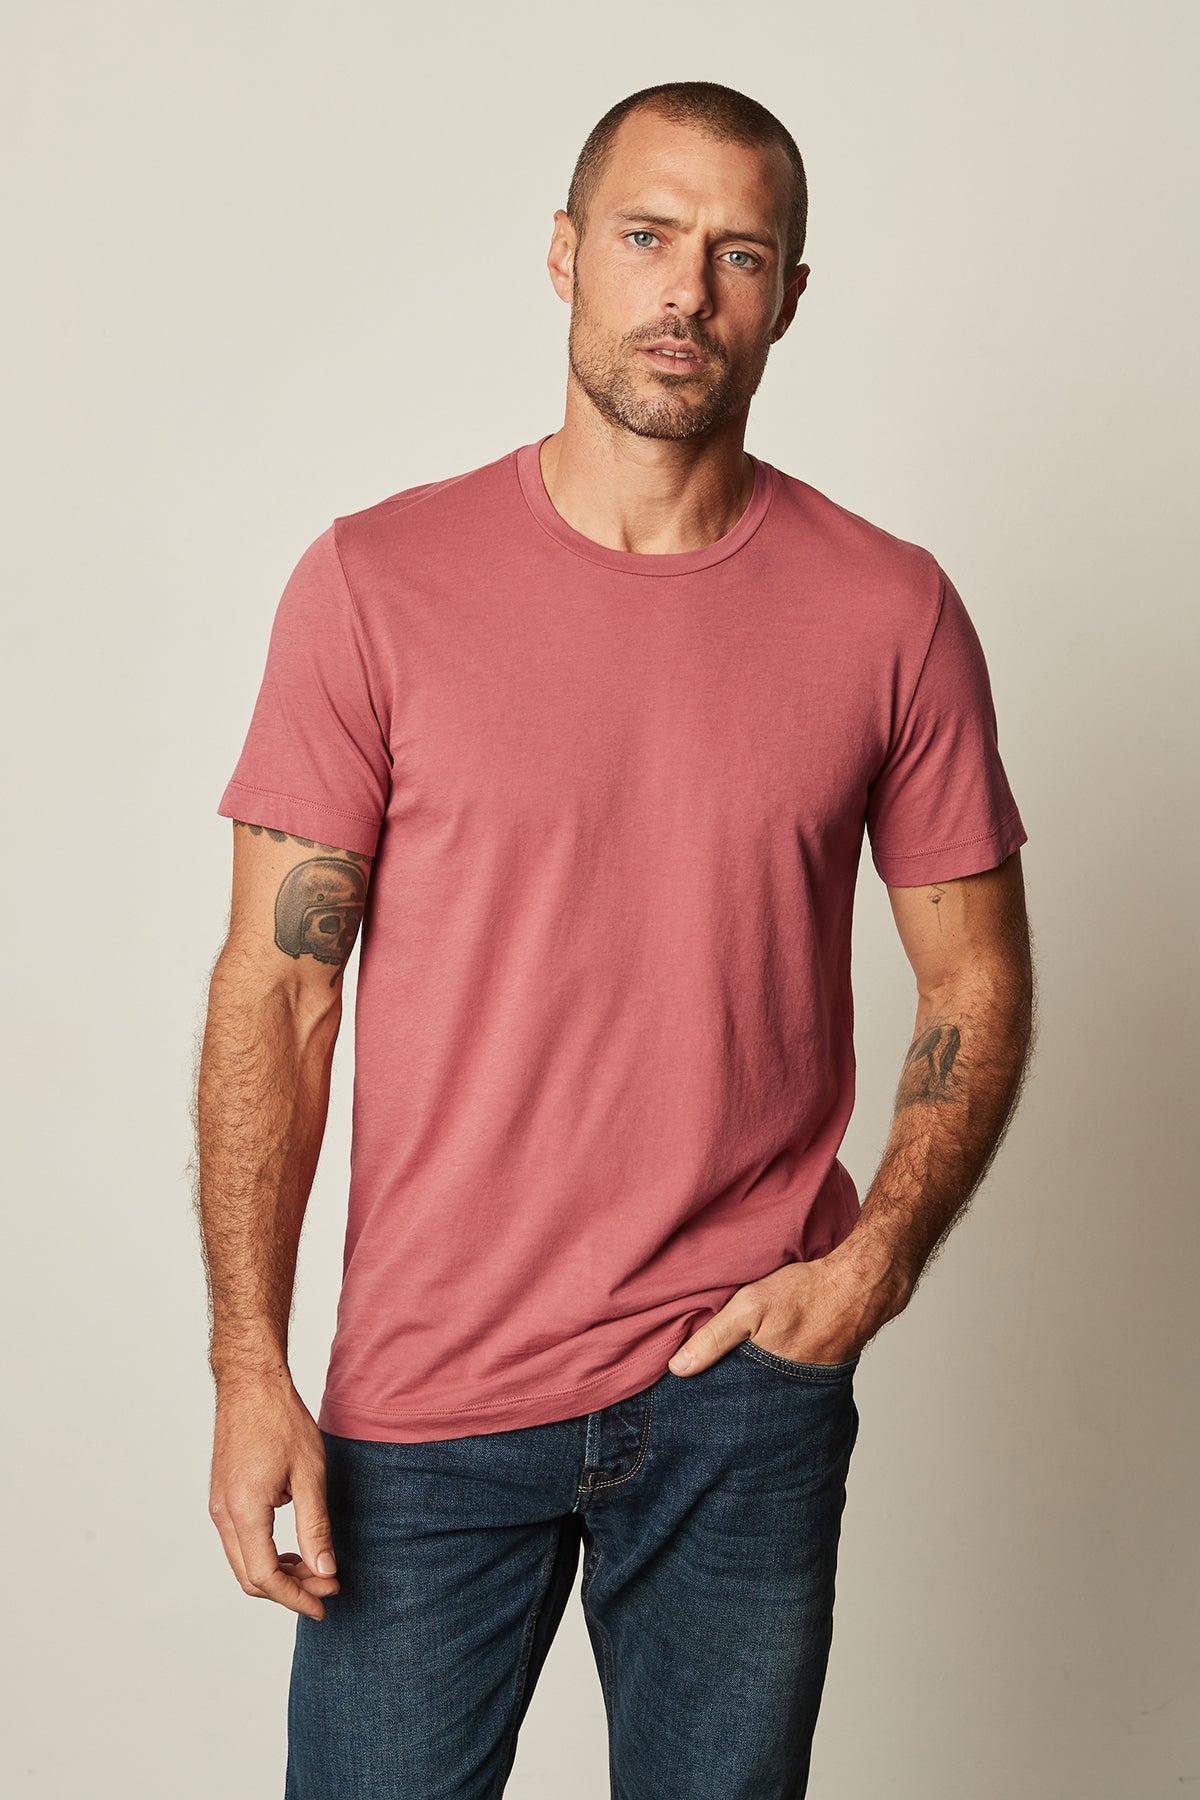 A man wearing a Velvet by Graham & Spencer HOWARD WHISPER CLASSIC CREW NECK TEE and jeans.-25793661403329